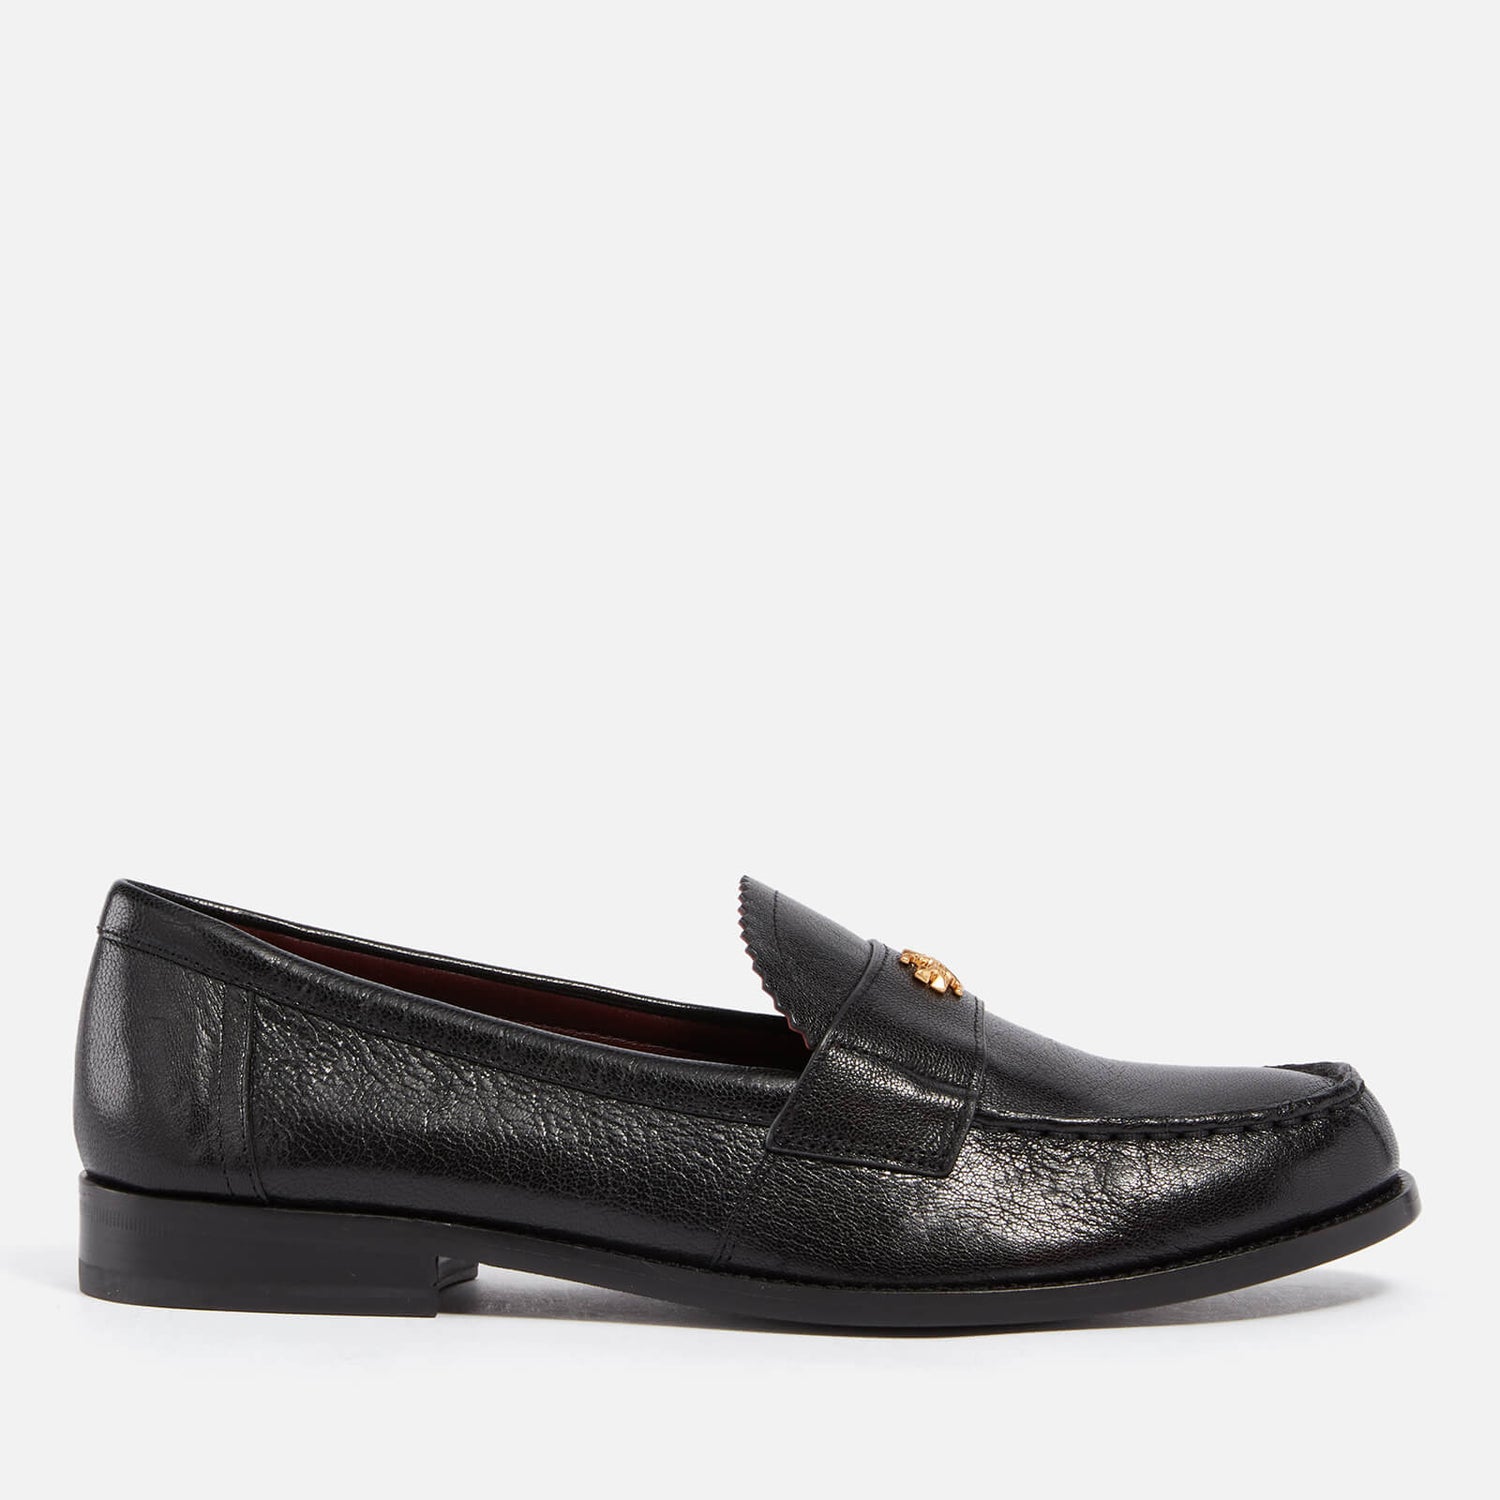 Tory Burch Women's Perry Leather Loafers - UK 6